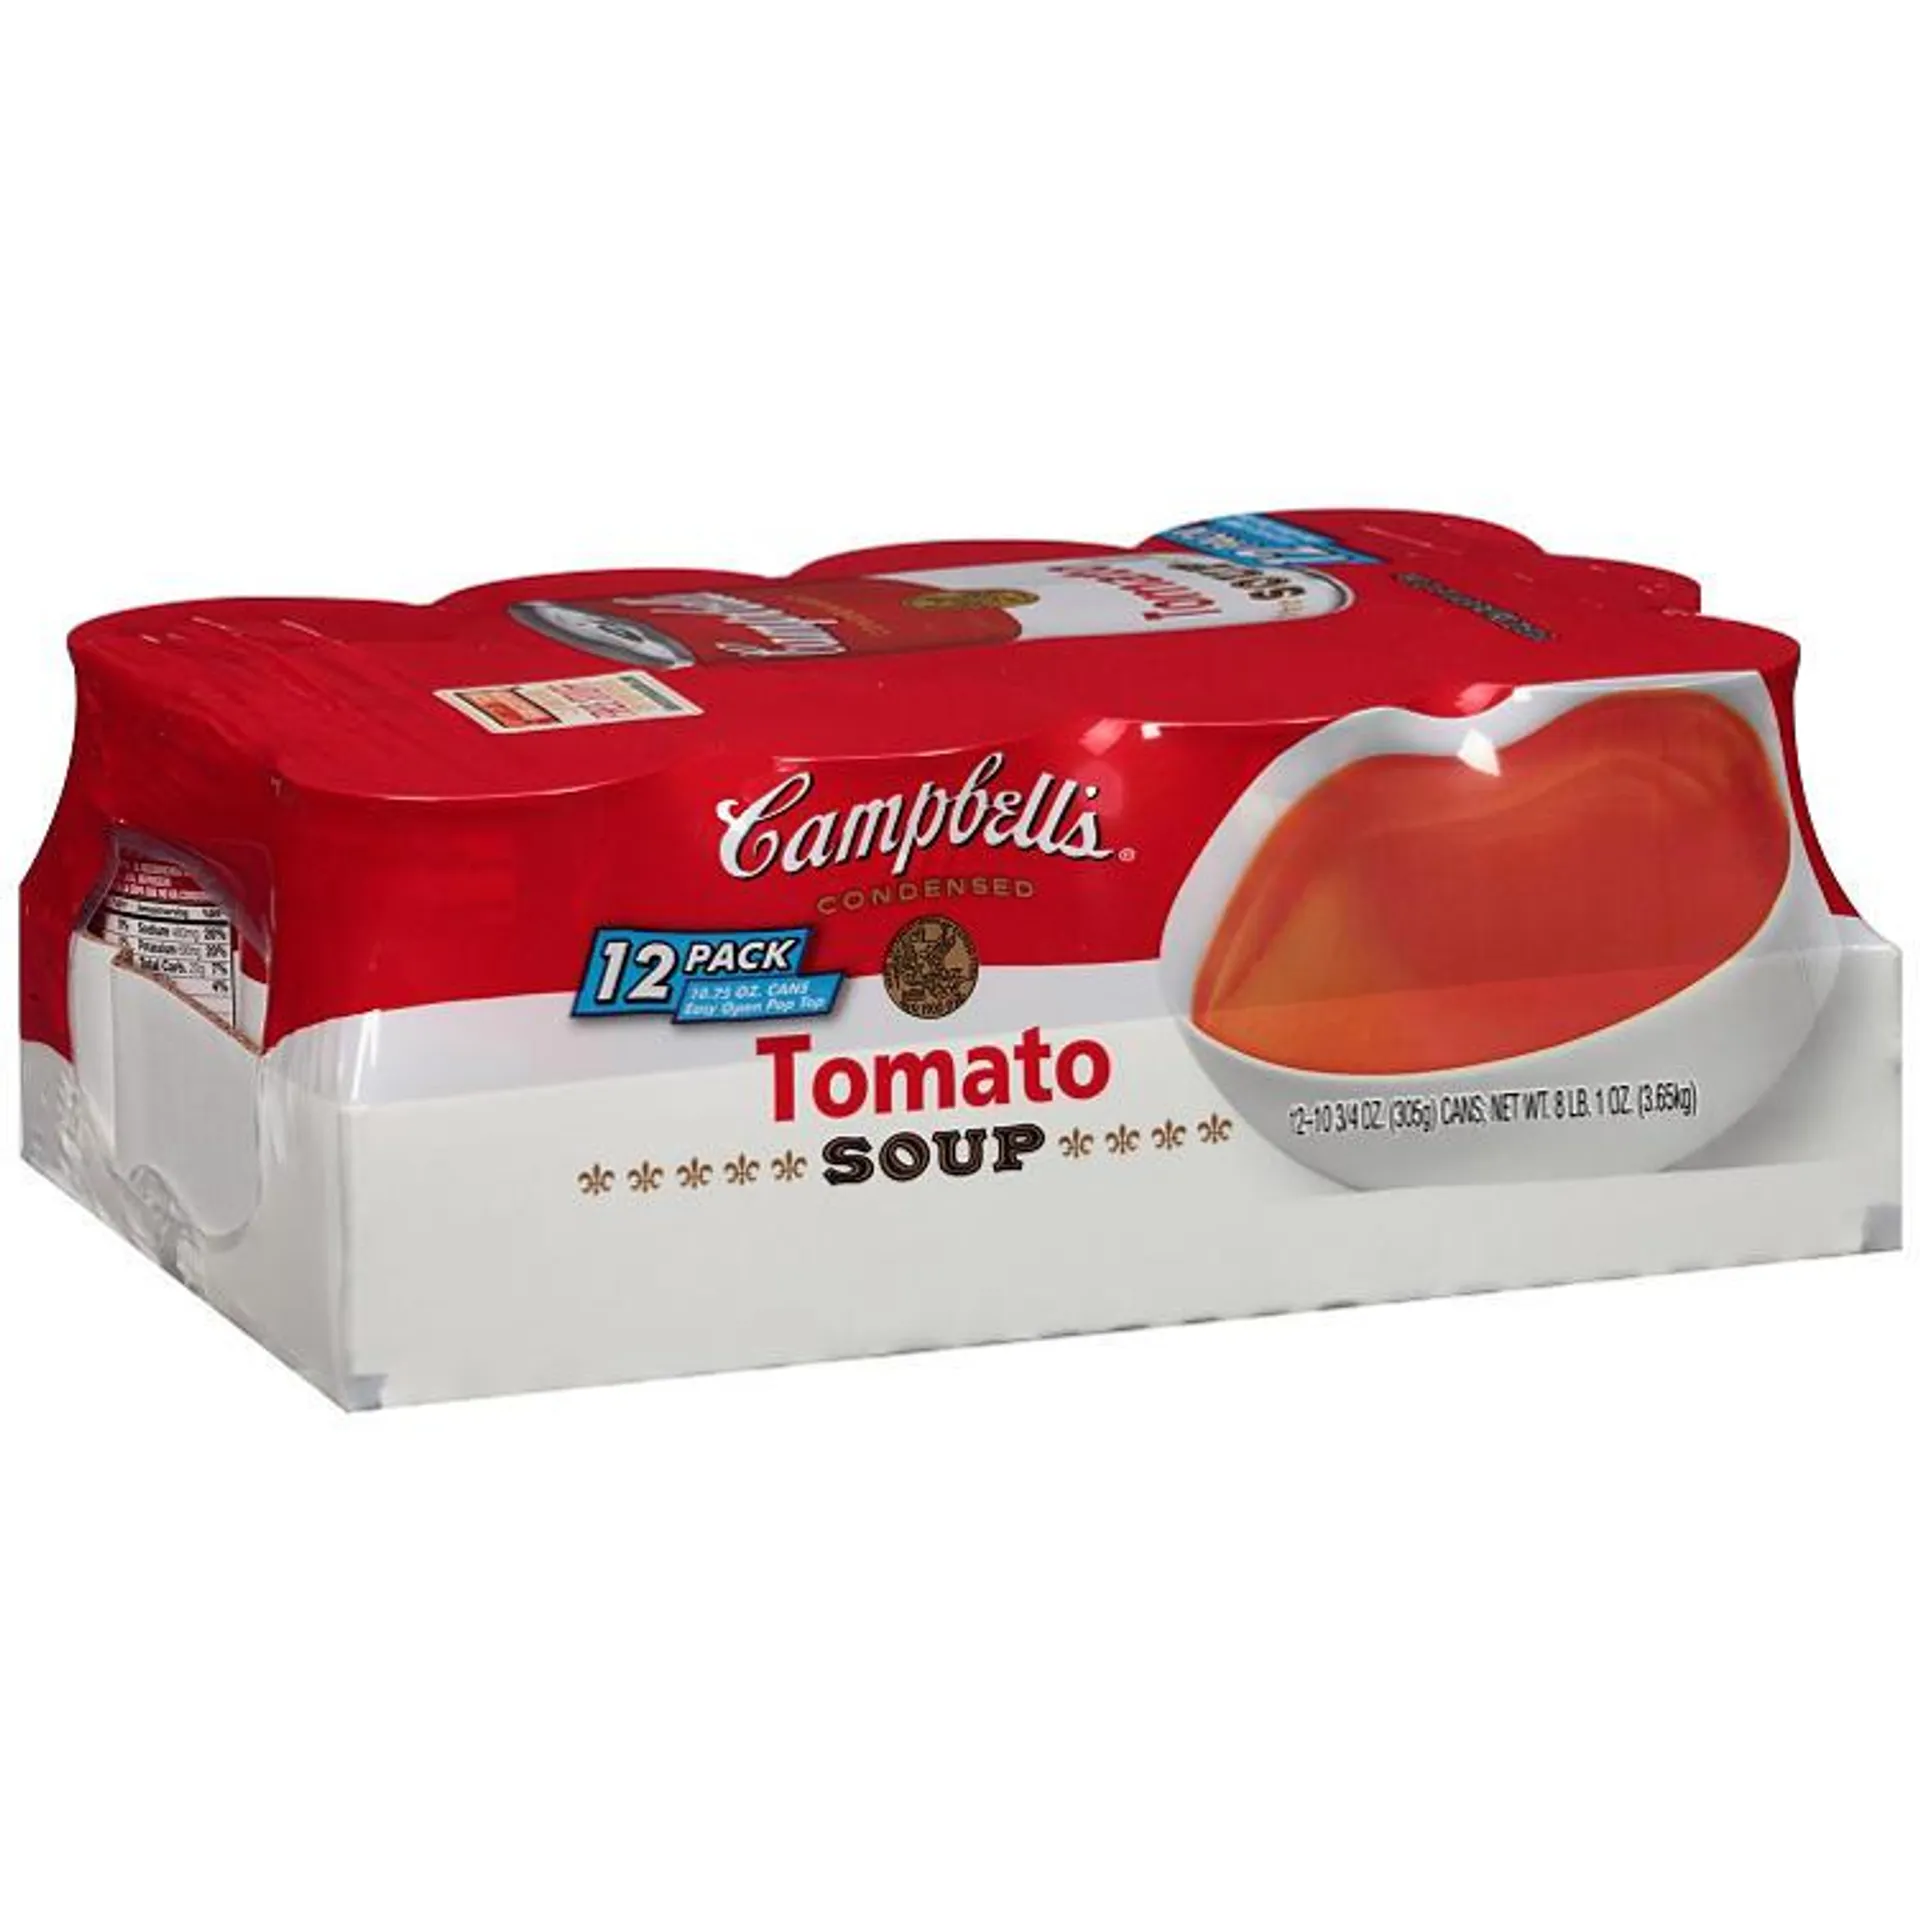 Campbell's Condensed Tomato Soup (10.75 oz., 12 ct.)